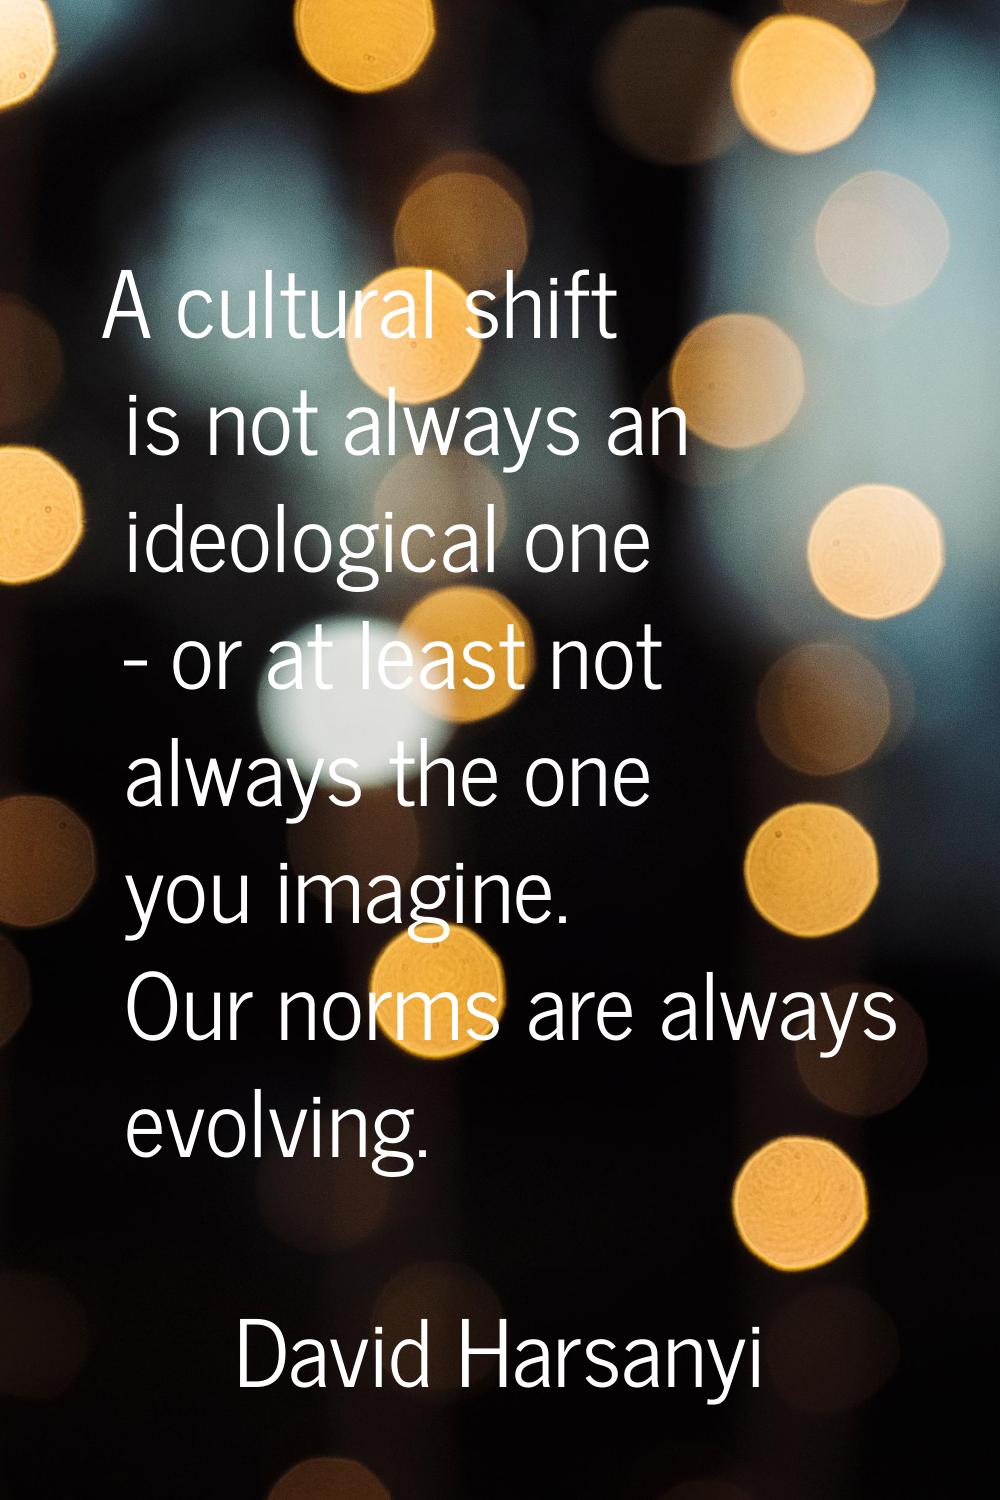 A cultural shift is not always an ideological one - or at least not always the one you imagine. Our